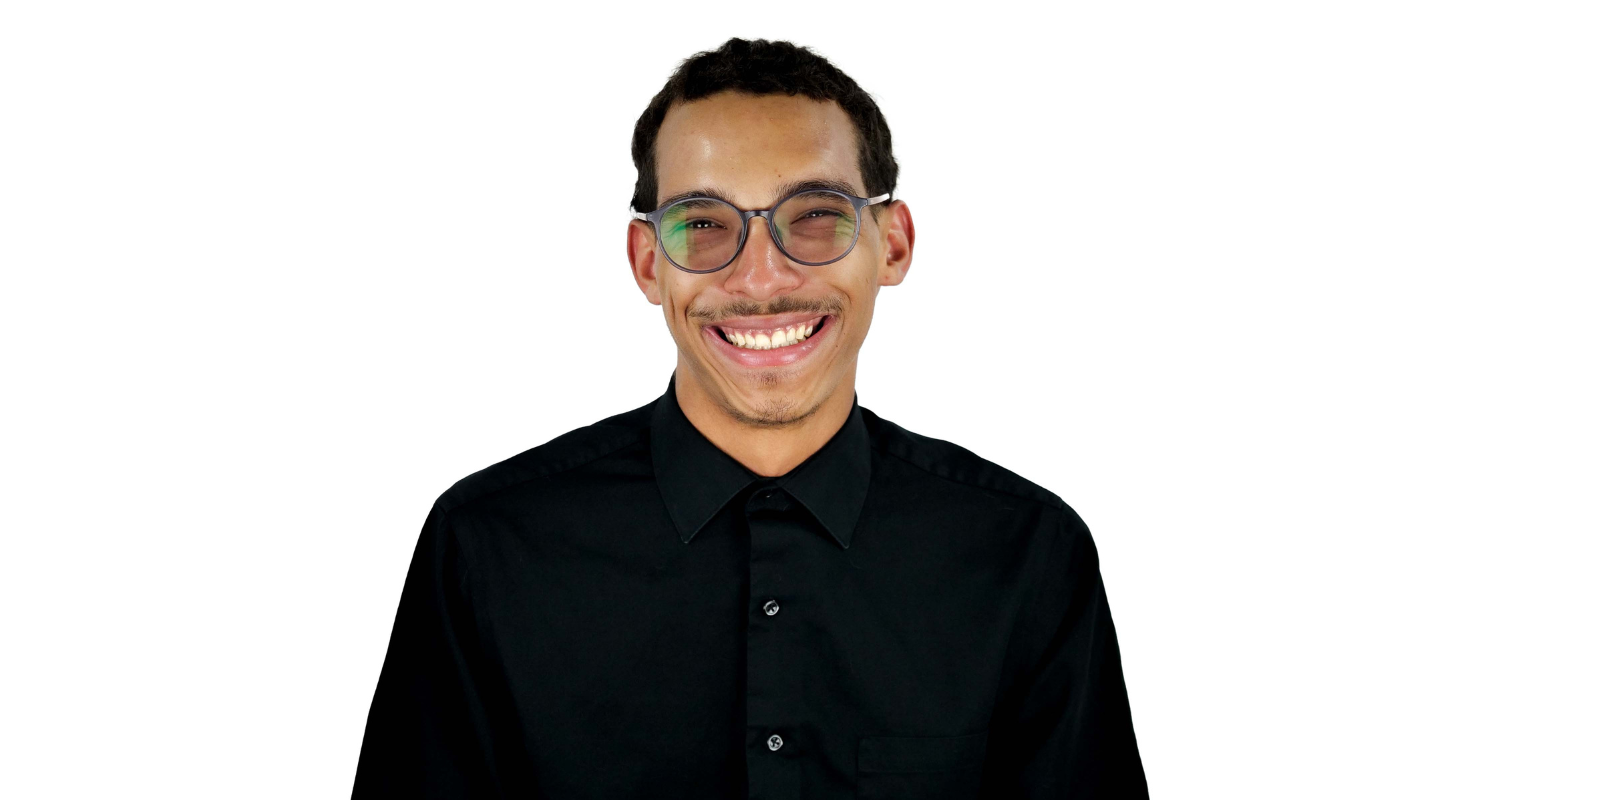 Anwar Allums in front of a white background. He is wearing glasses and a black button up shirt